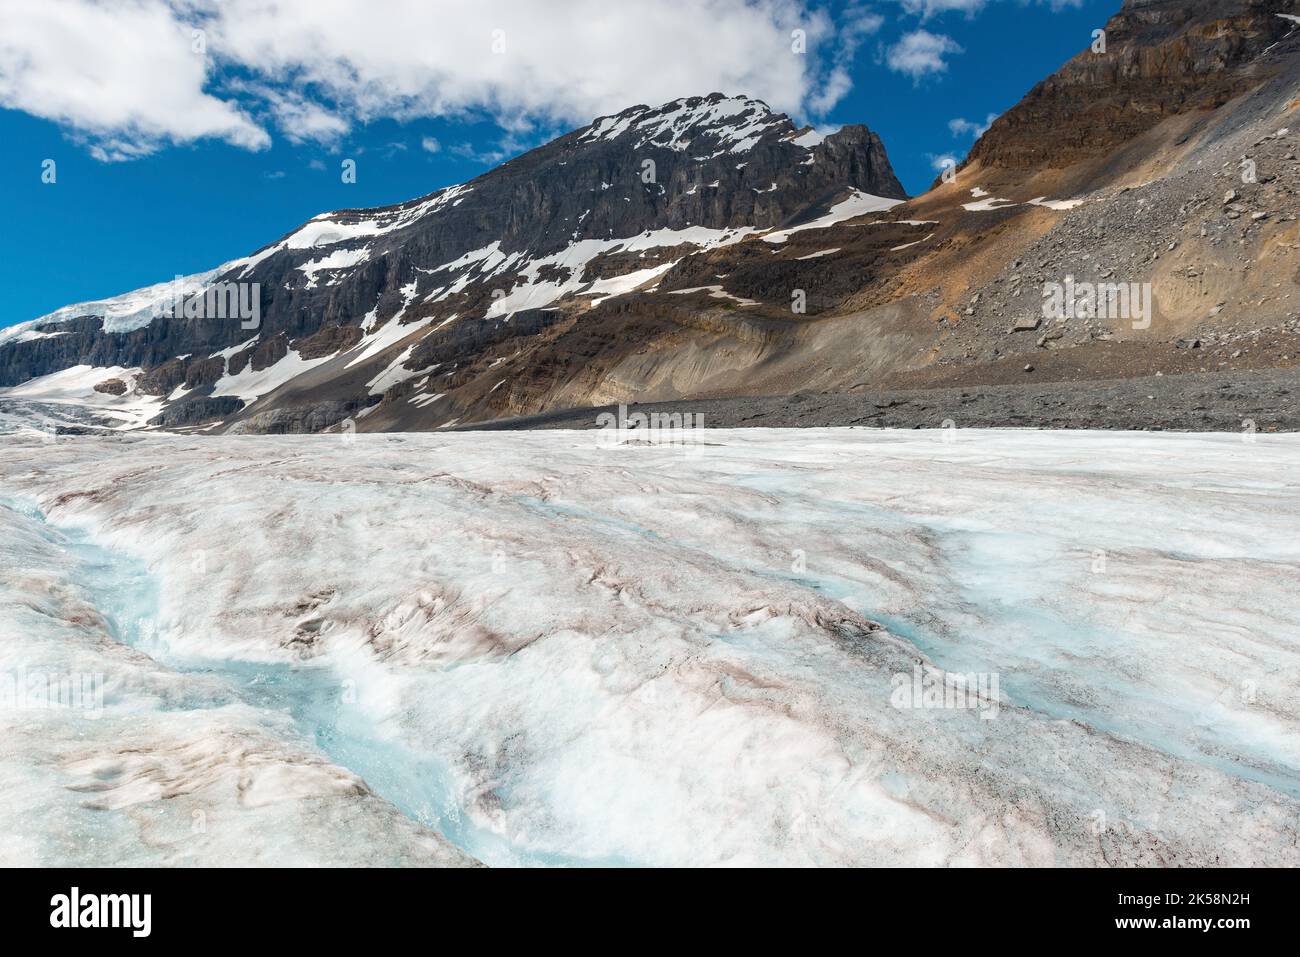 Athabasca glacier with melting water forming a small river, Jasper national park, Alberta, Canada. Stock Photo